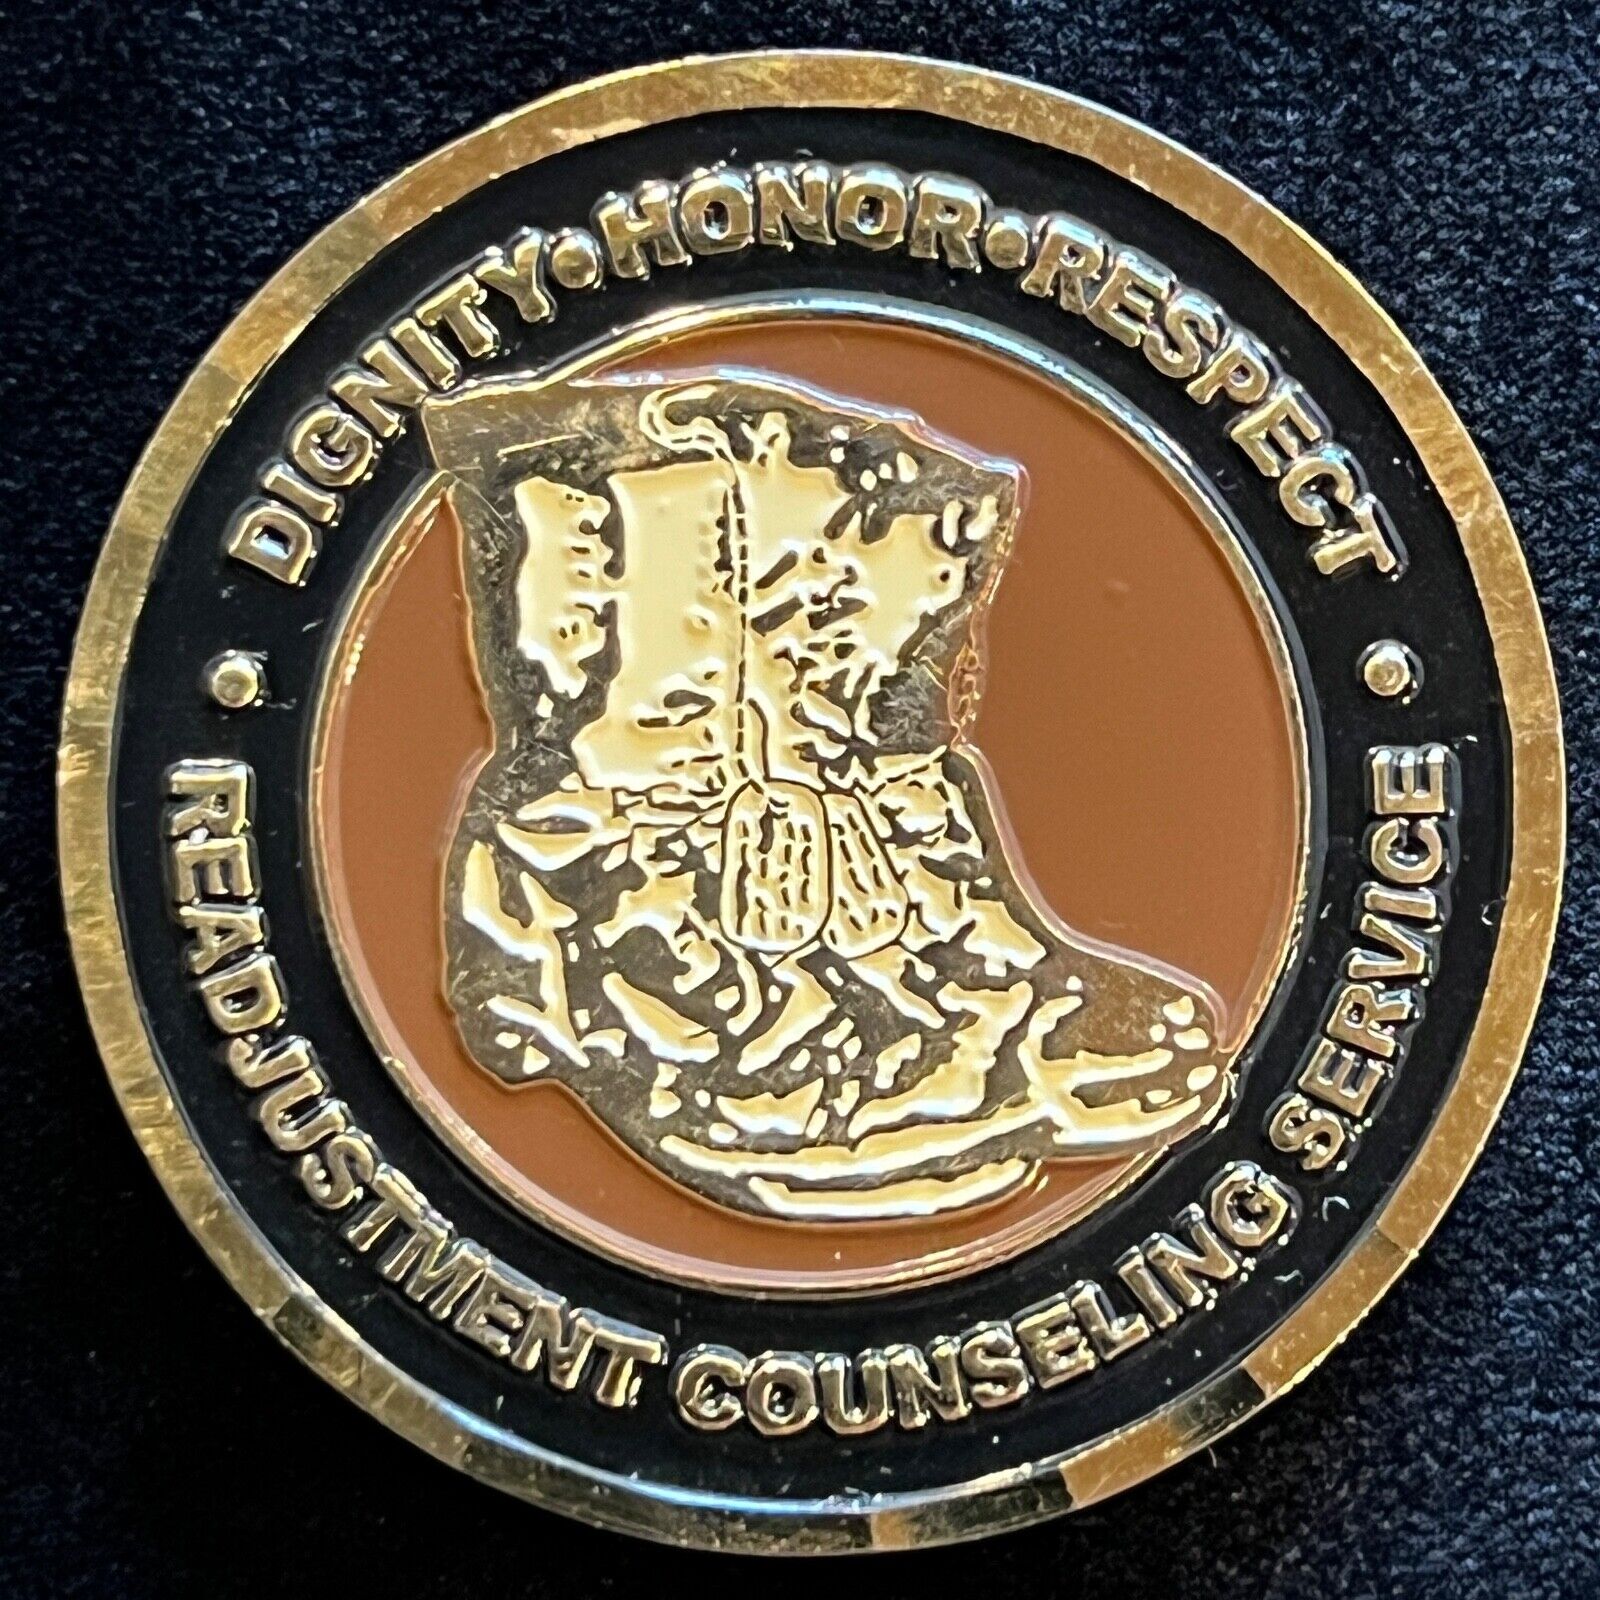 Vet Center Readjustment Counseling Service Challenge Coin